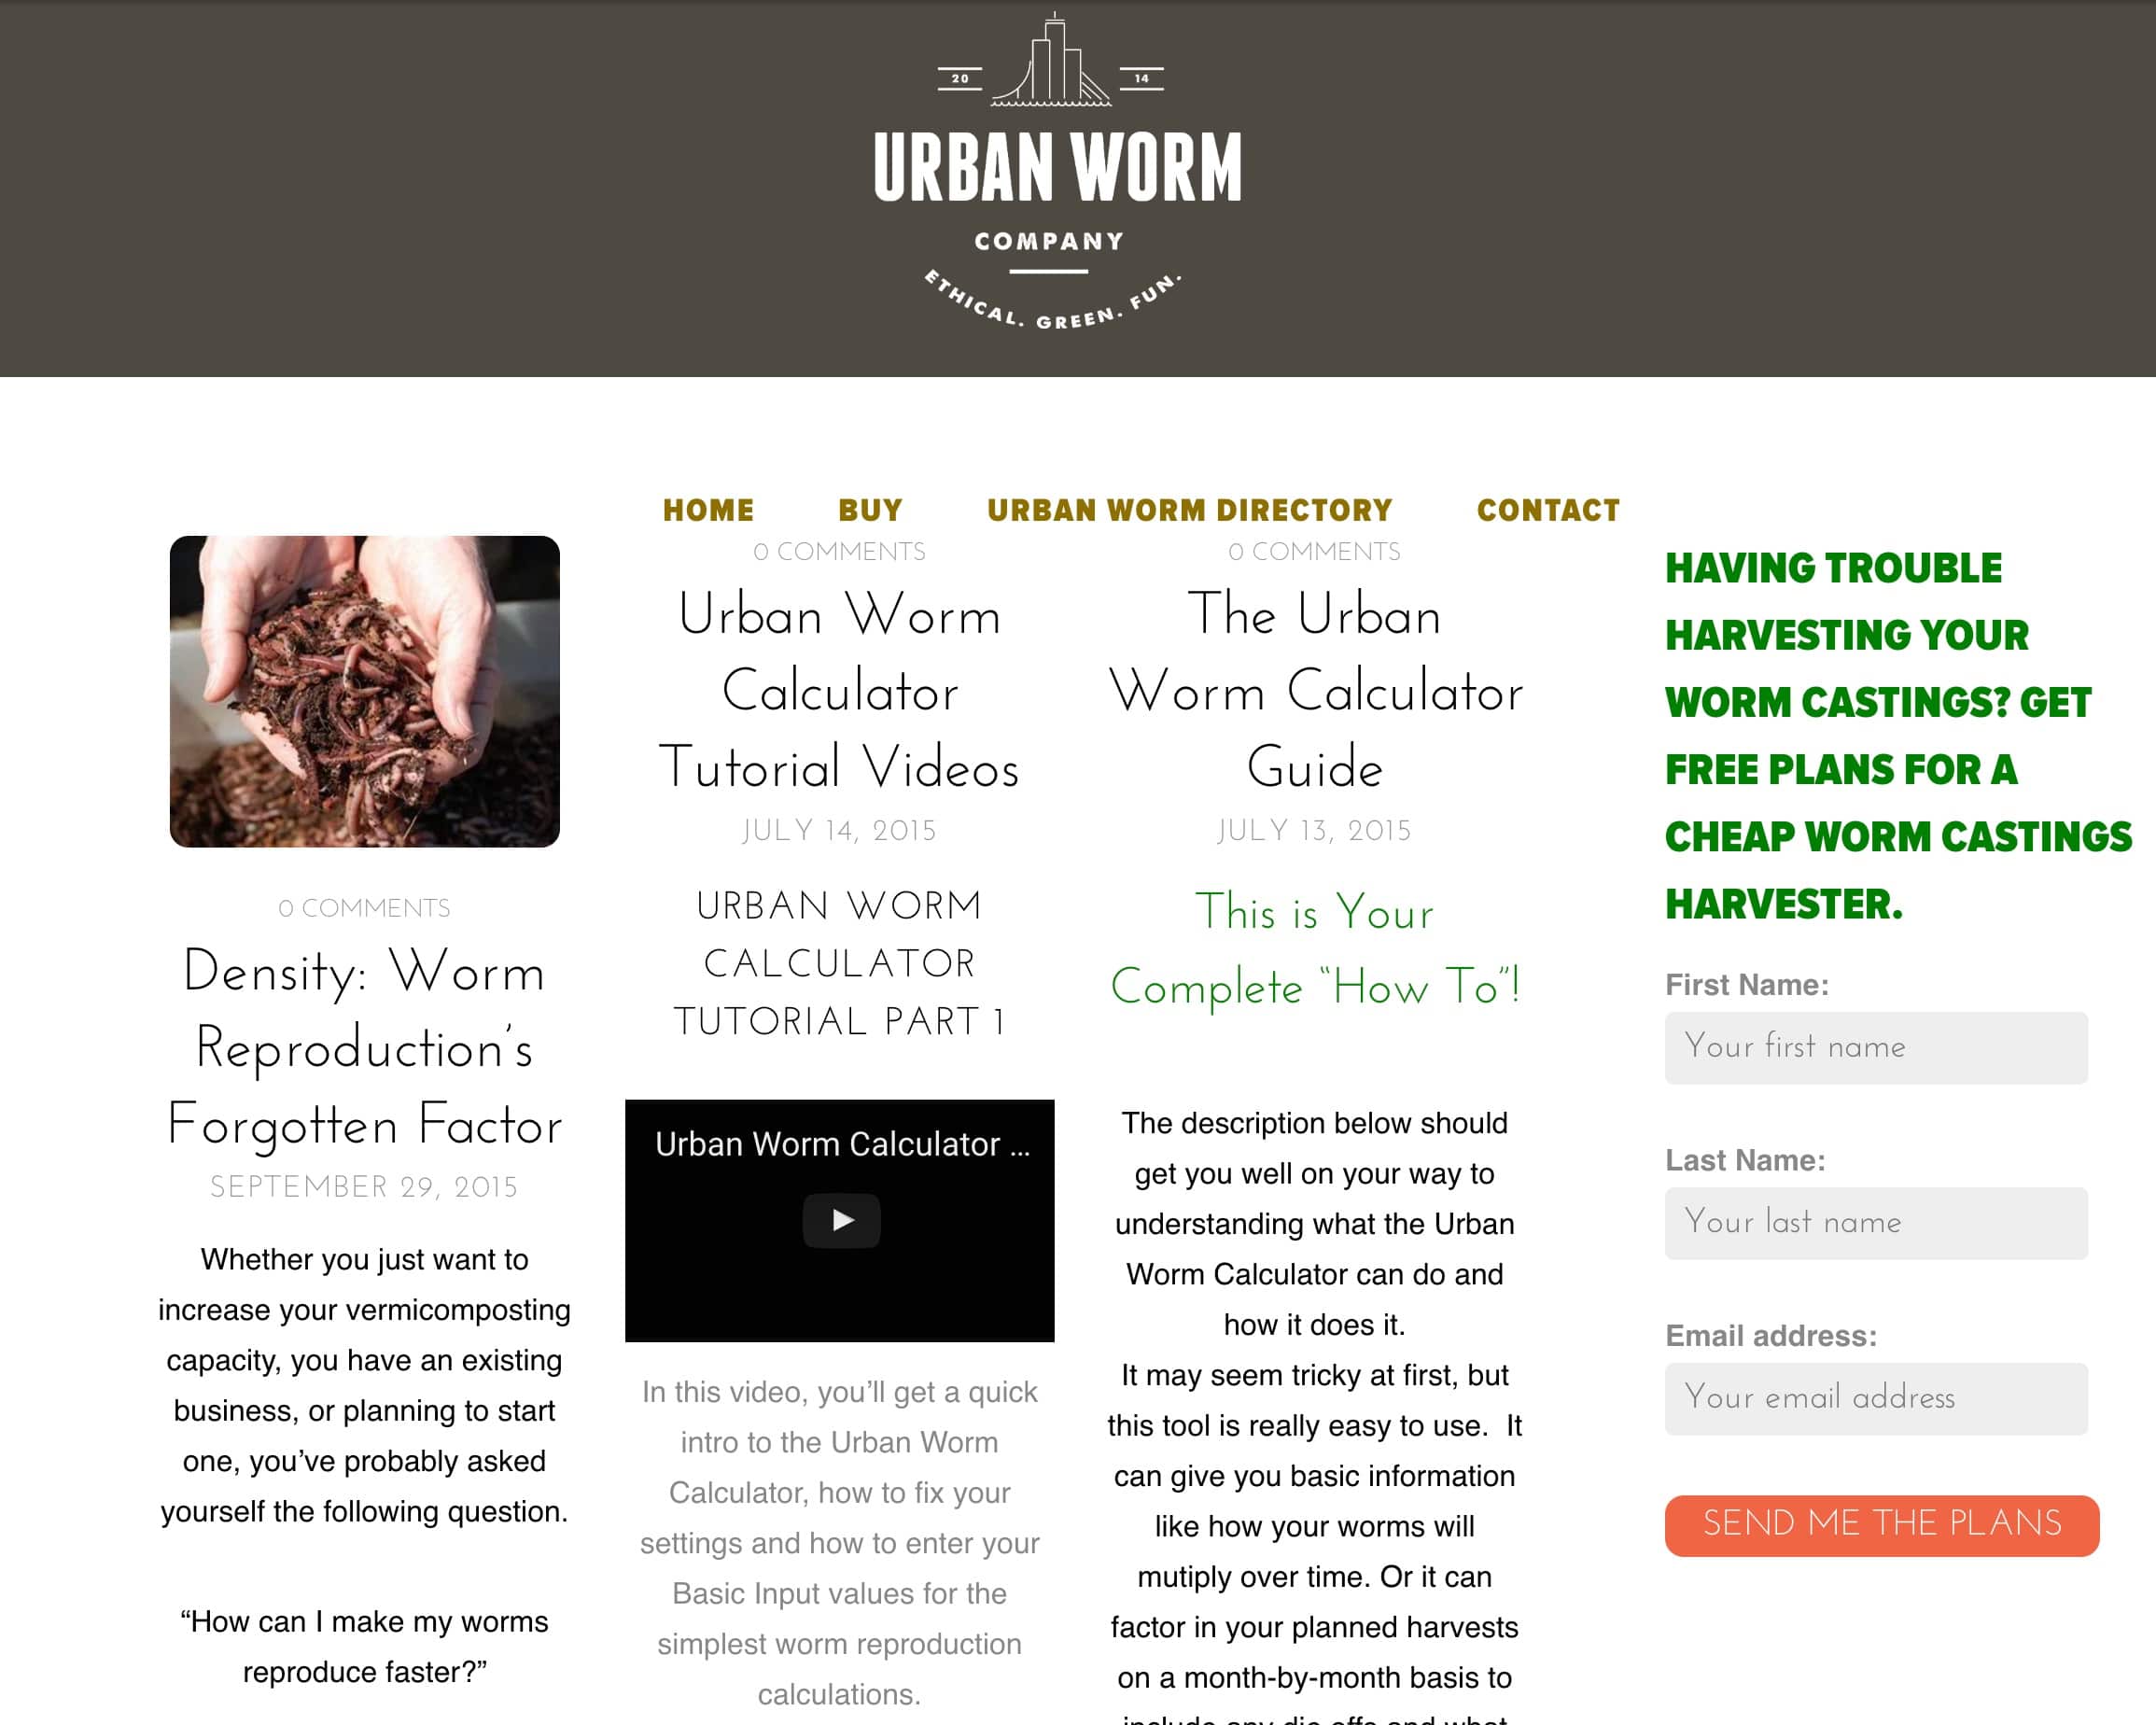 How the Urban Worm Company website looked in 2015